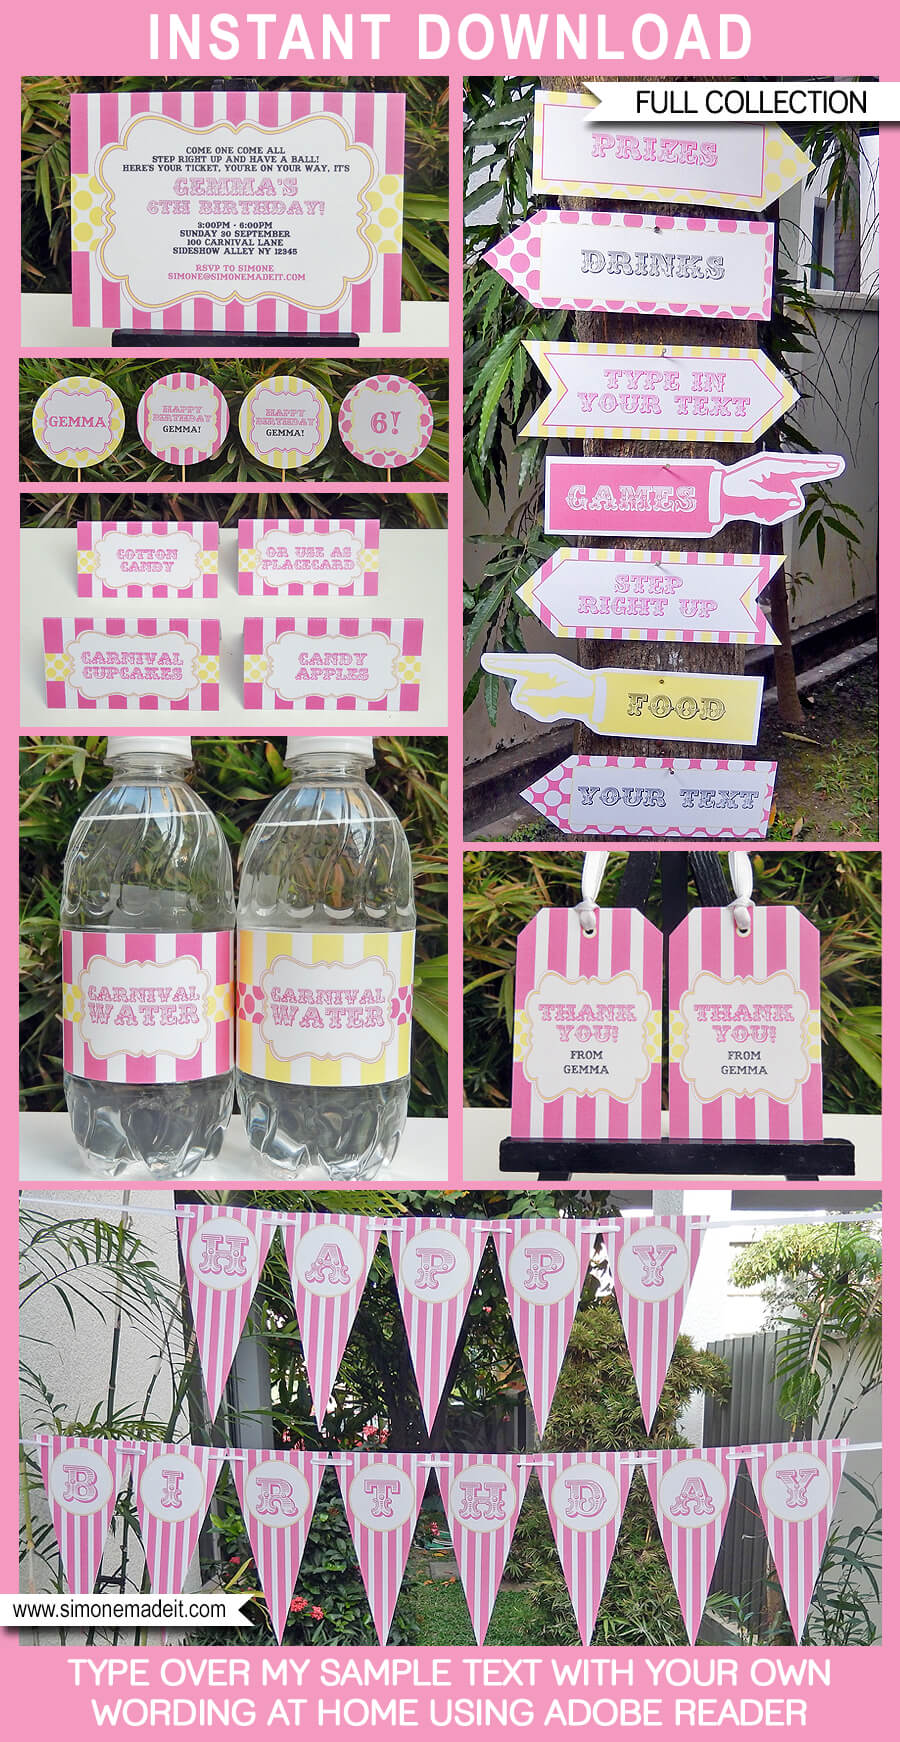 Pink Yellow Carnival Party Printables, Invitations & Decorations | Circus Party | Birthday Party | Editable Theme Templates | INSTANT DOWNLOAD $12.50 via SIMONEmadeit.com